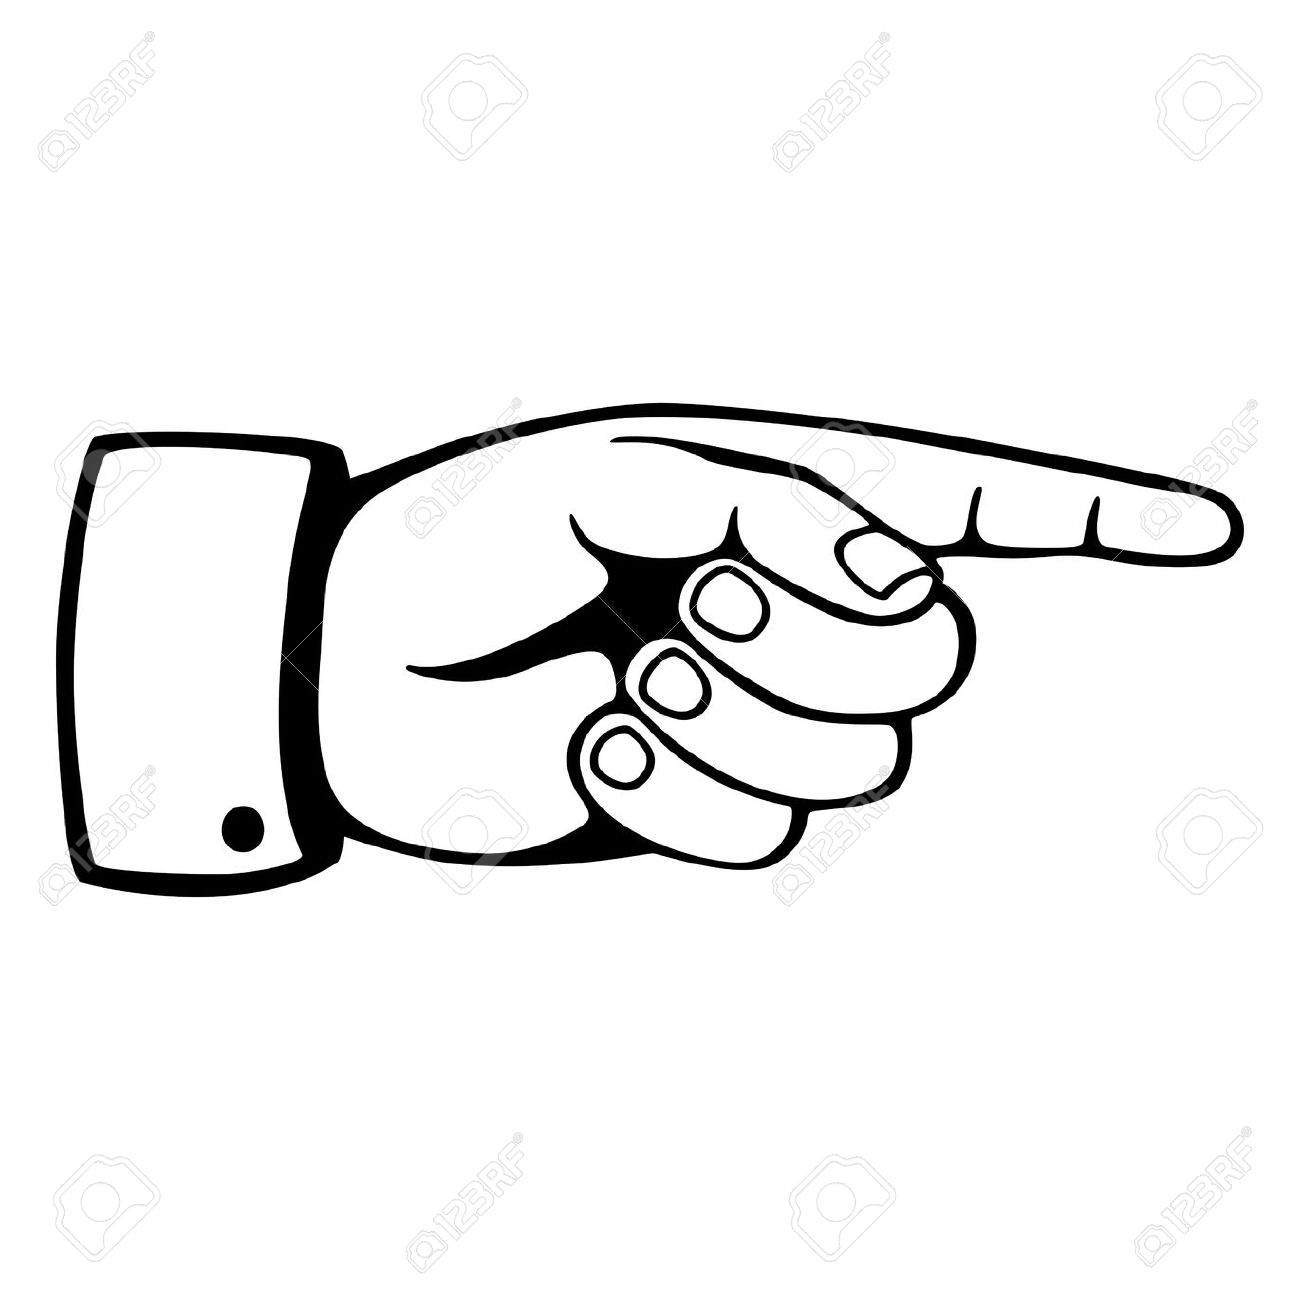 Pointing Hand Clipart #1 - Hand Pointing Clipart